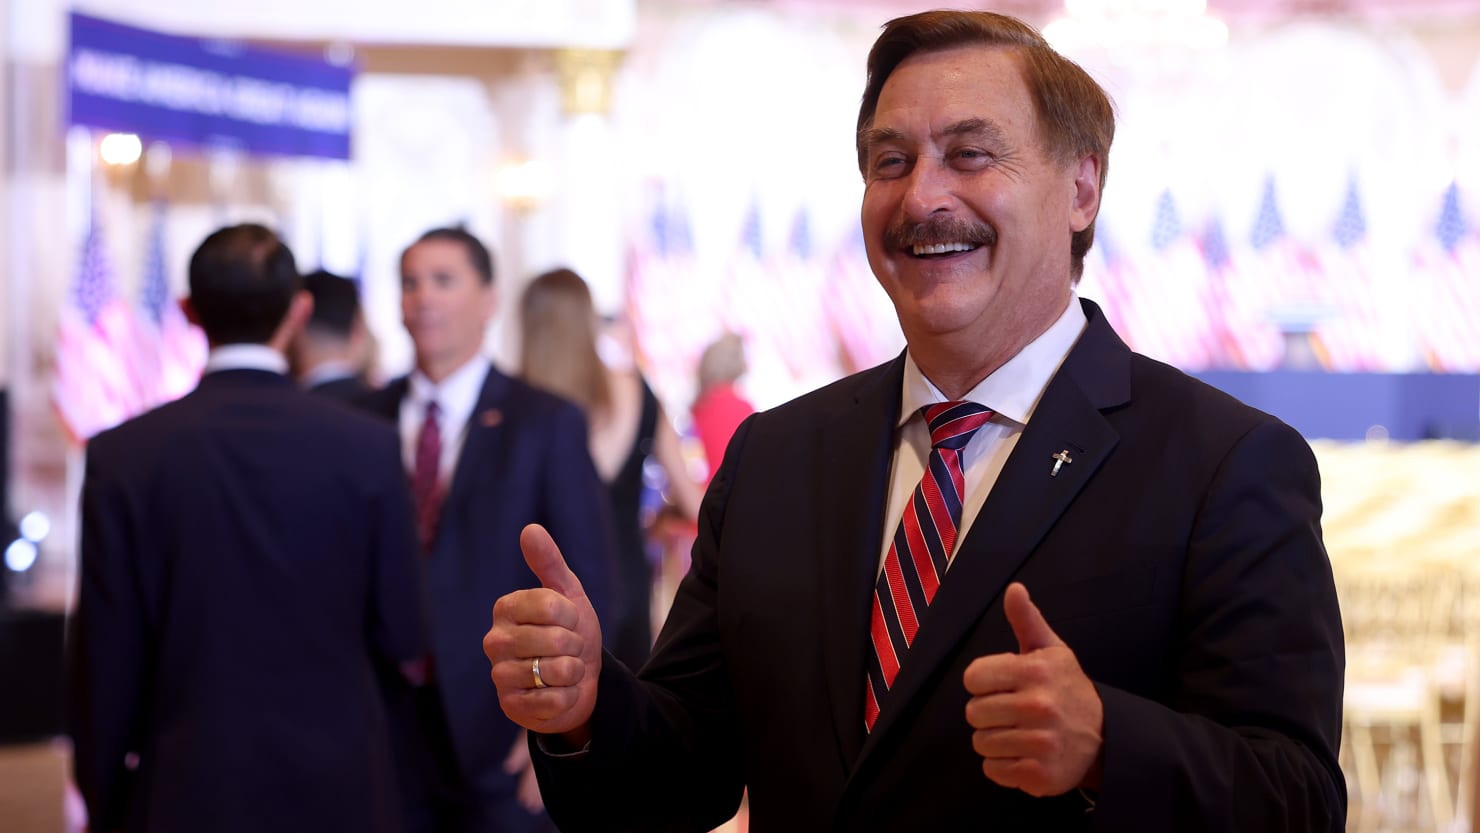 MyPillow Guy' Mike Lindell has run out of money, can't pay legal